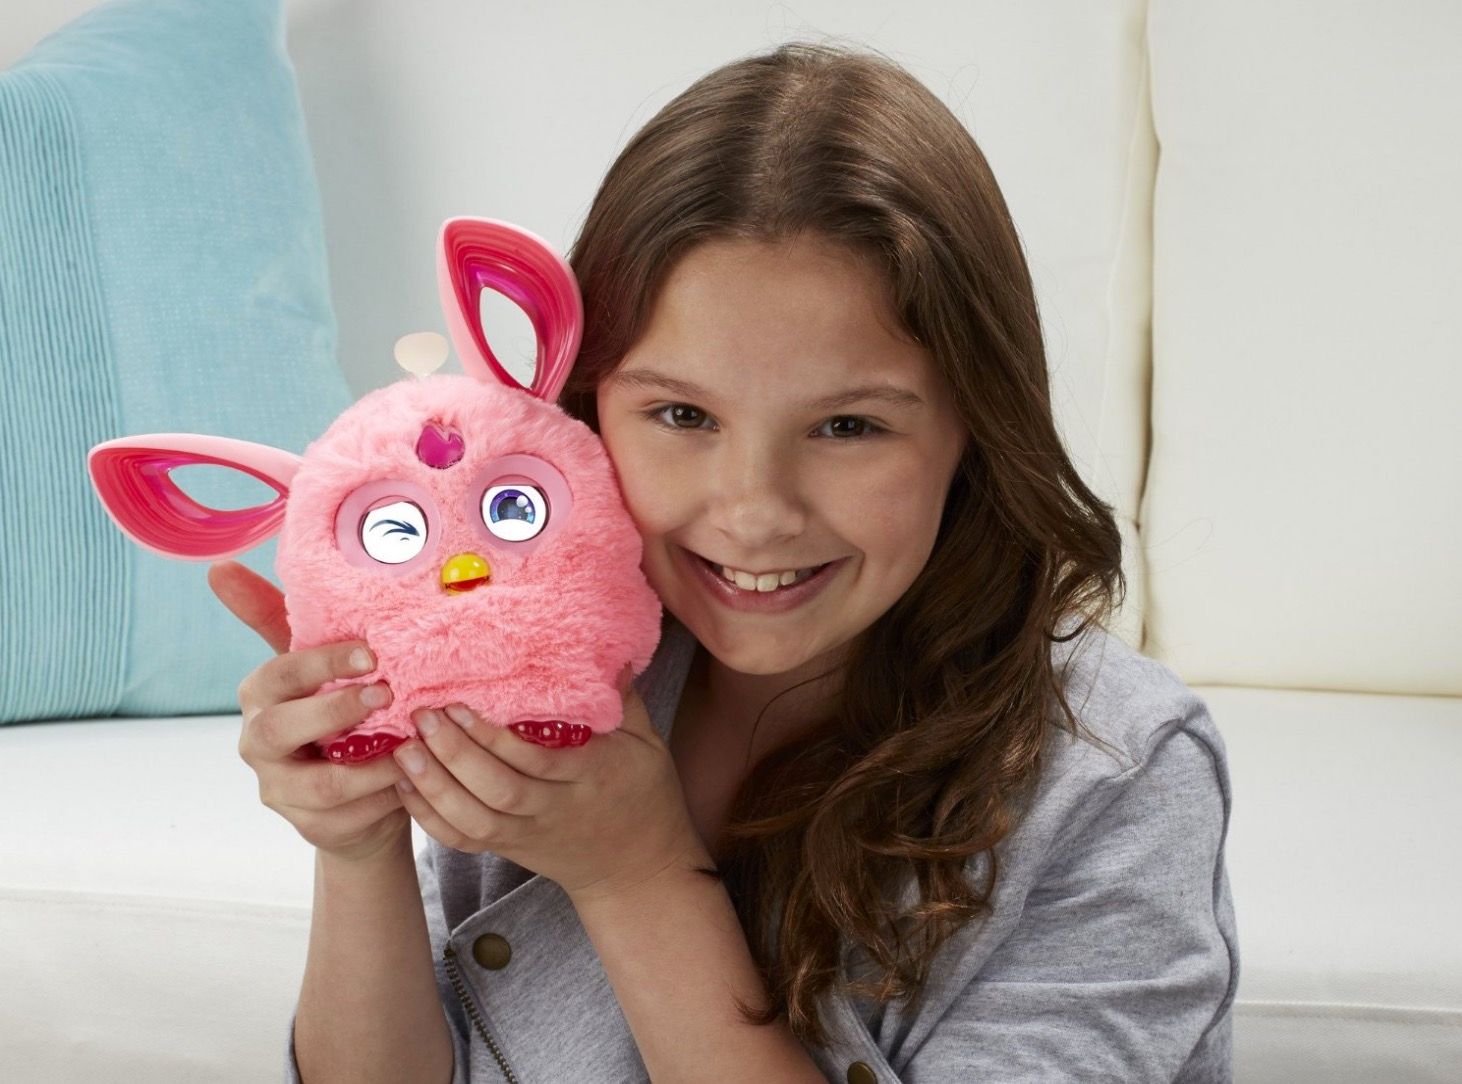 hasbro s furby is now a connected toy with lcd screens for eyes image 1